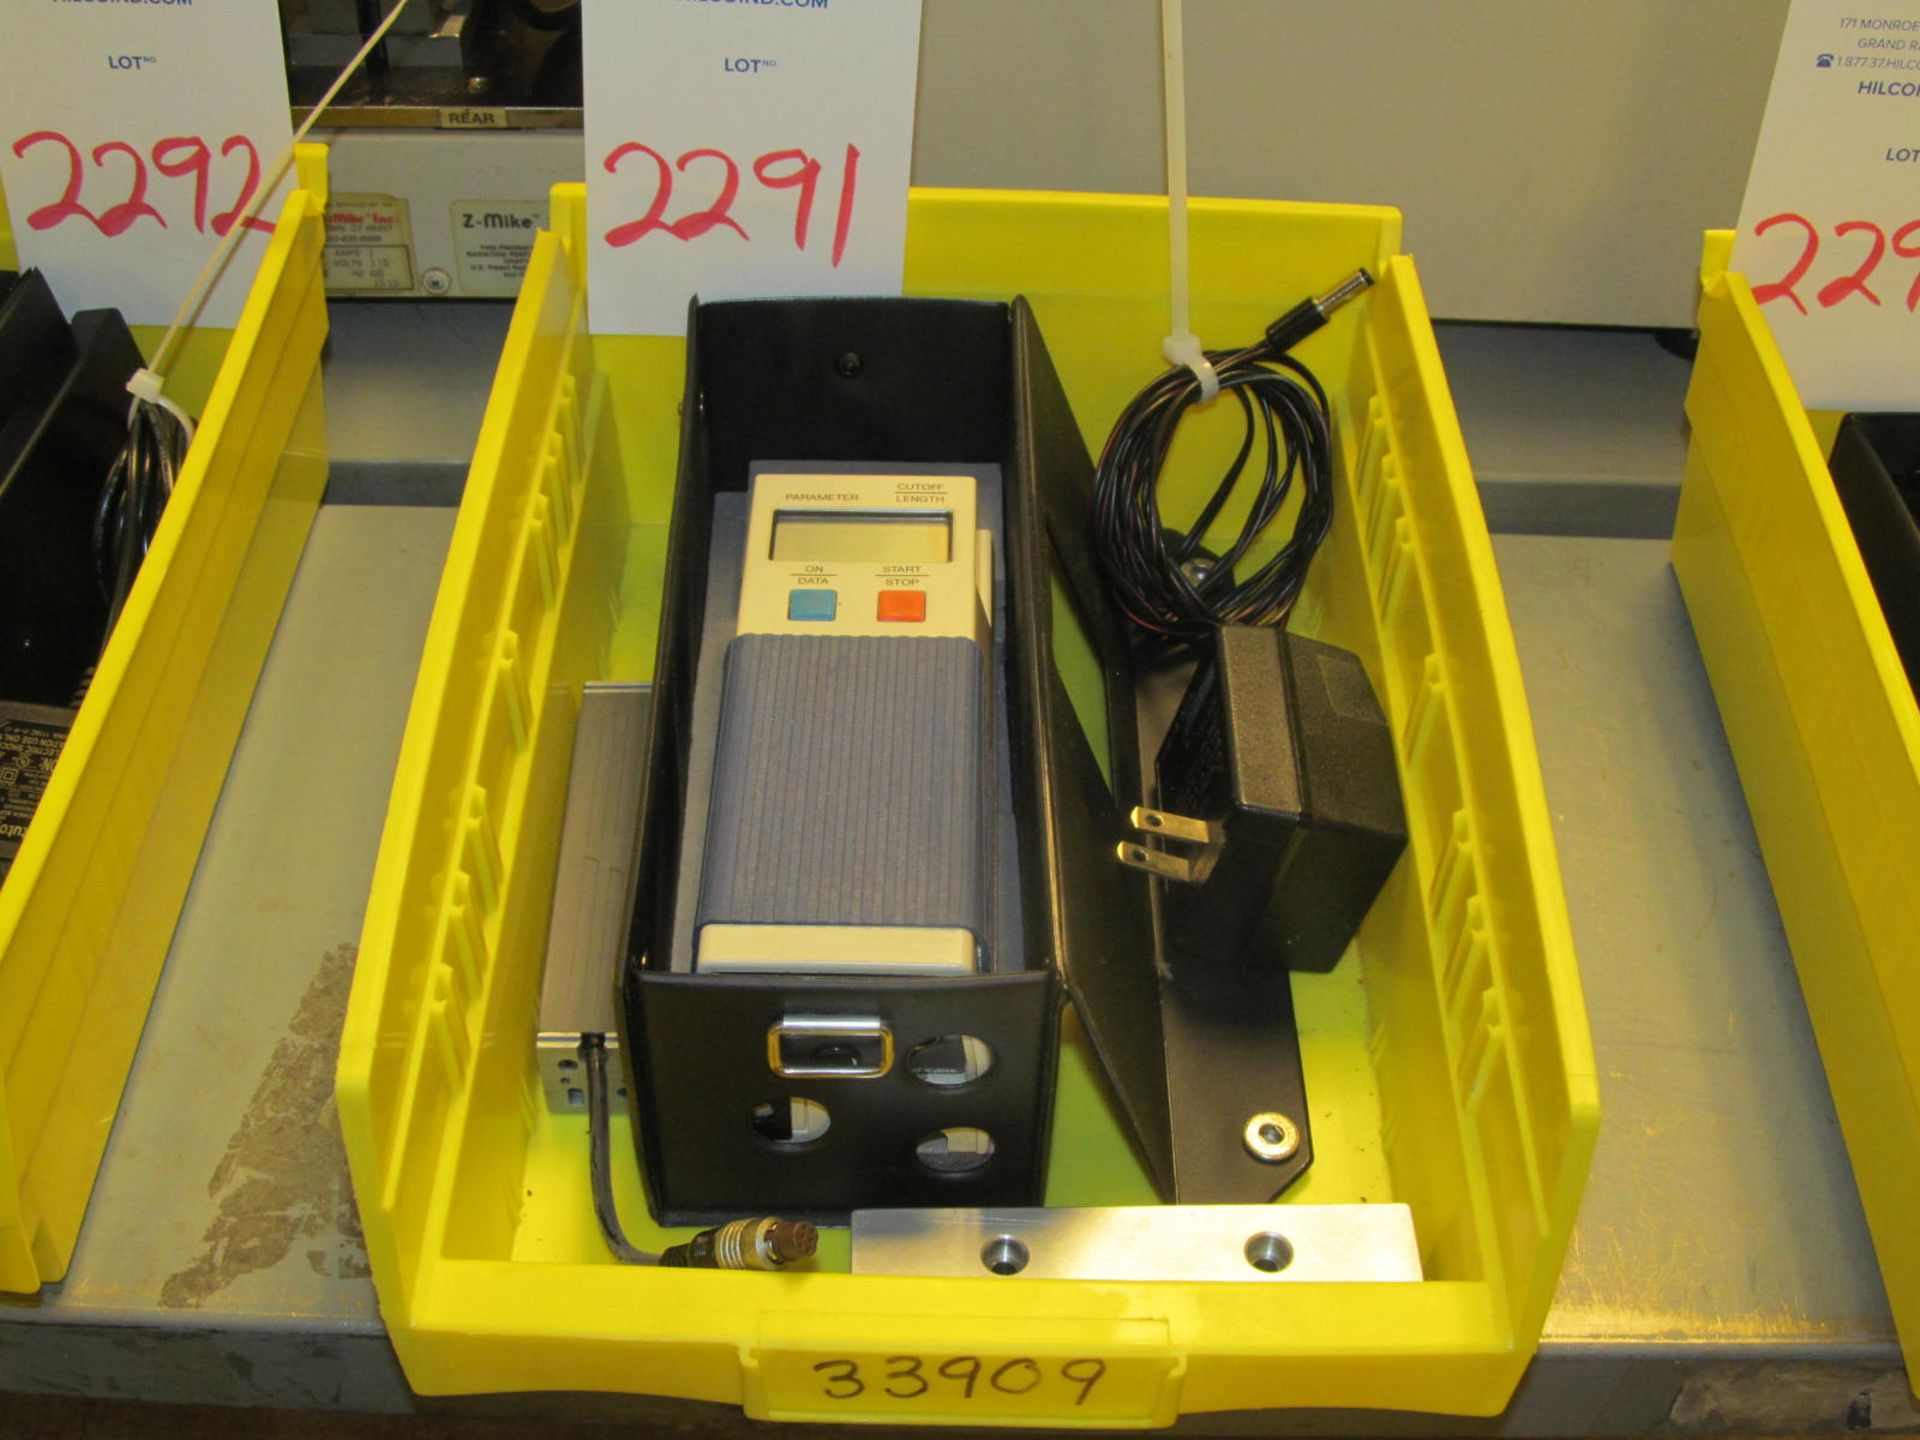 Mitutoyo Model Surftest-211 Portable Roughness Tester